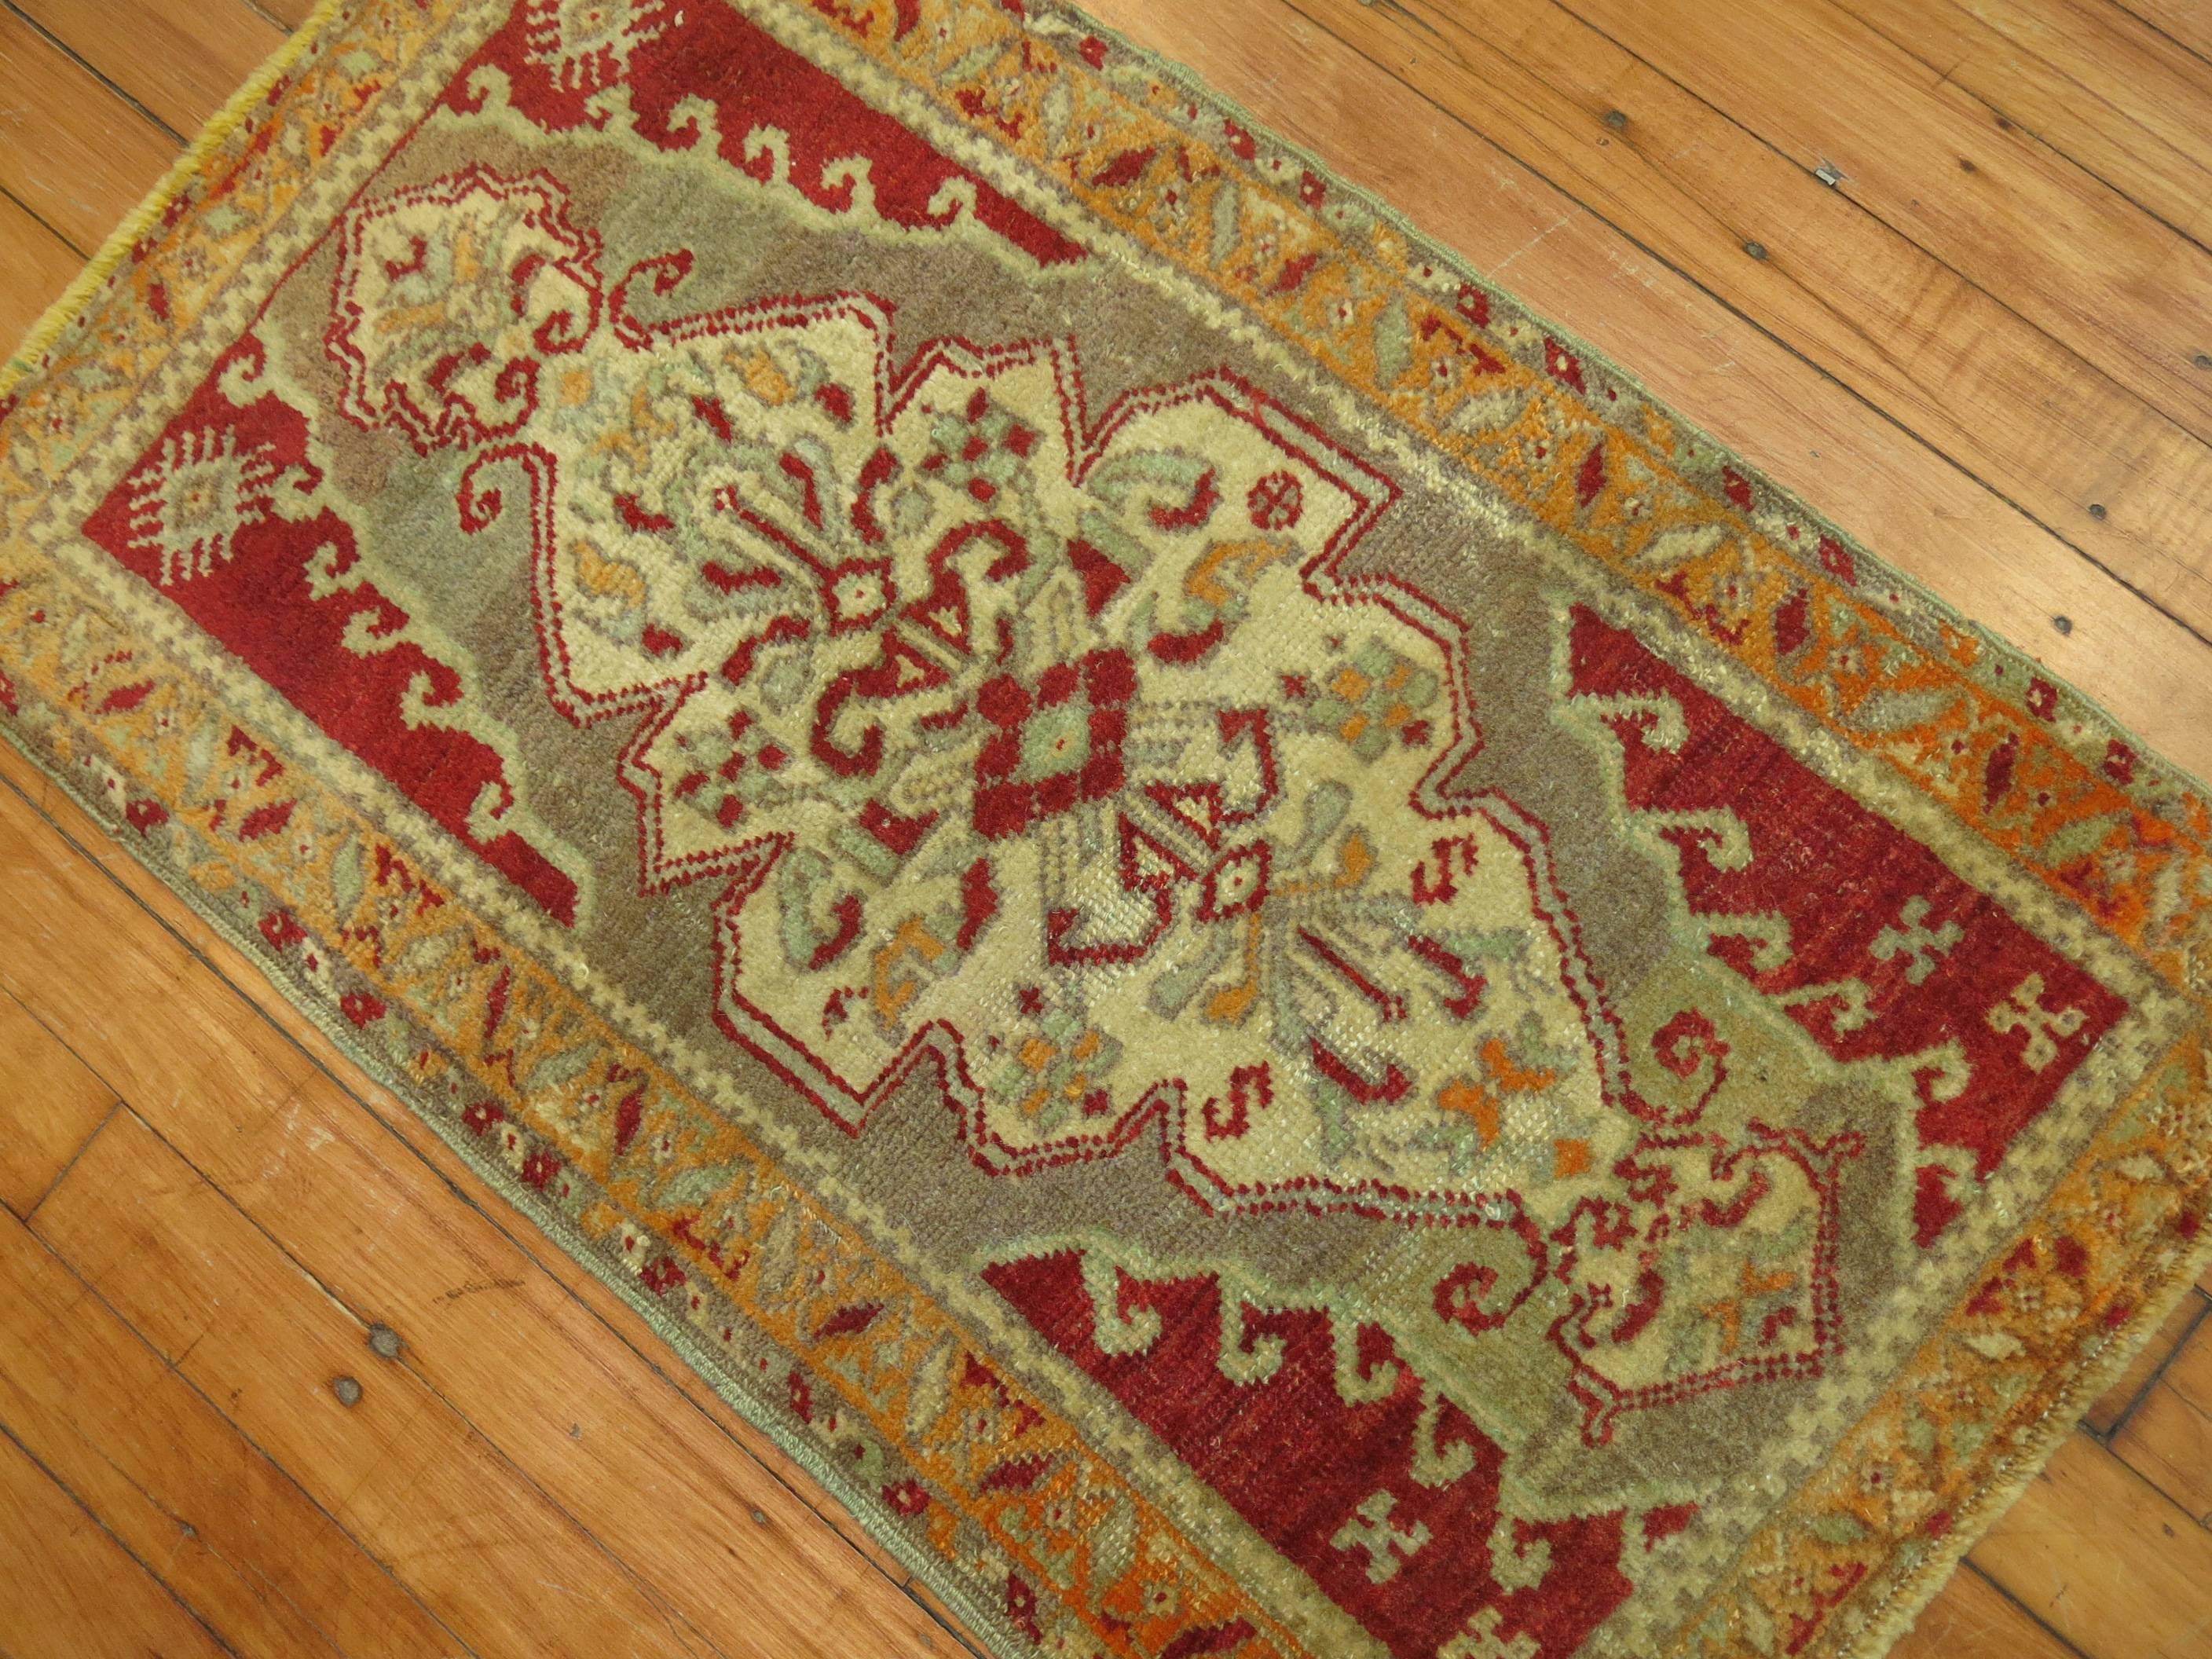 20th century one of a kind fine quality Turkish Sivas rug. Gray, red, orange and ivory hues.